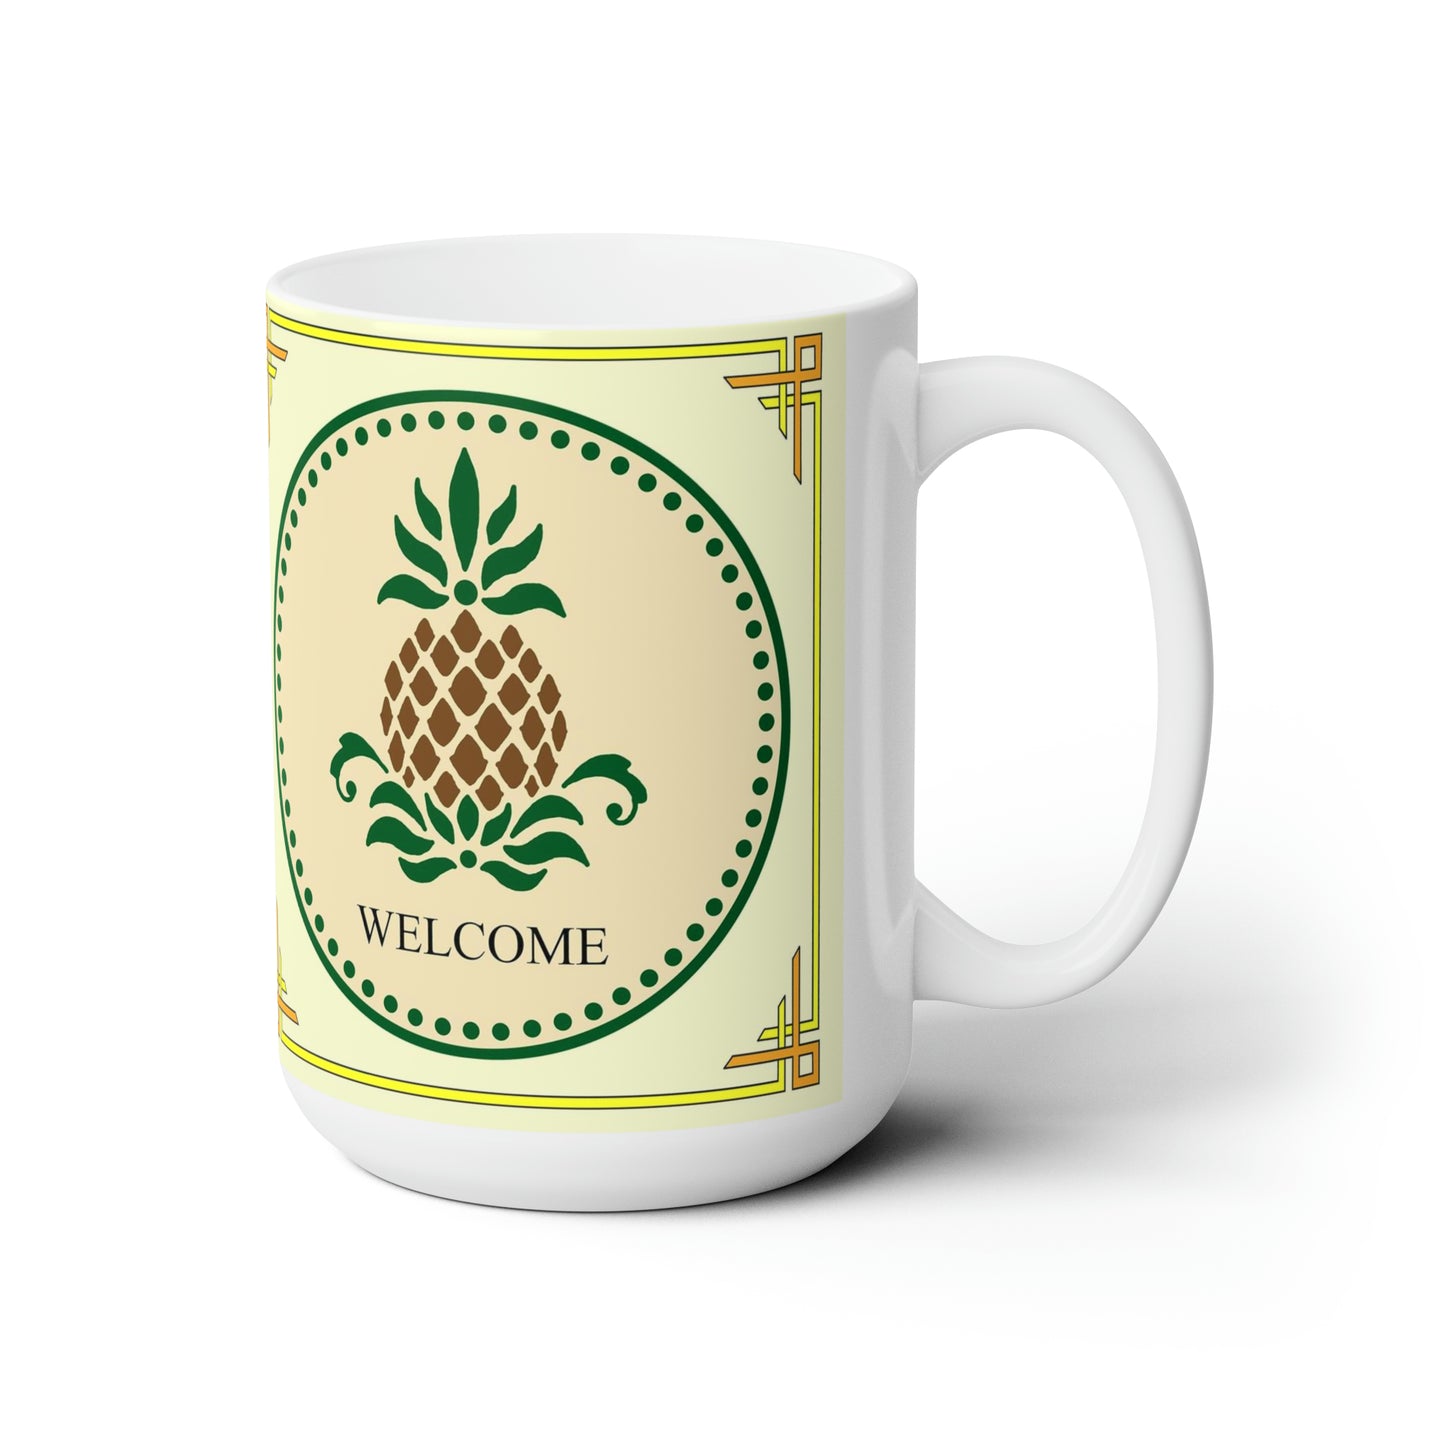 Start your day or entertain friends when you serve steaming cups of coffee, tea or hot chocolate in these attractive Welcome Folk Art Design 15 oz. mugs. The pineapple has long been a symbol of hospitality and a welcoming spirit and will be  appreciated by your guests.  The Welcome Folk Art Design Mug image is a reproduction of a creative art design by artist Lee M. Buchanan.